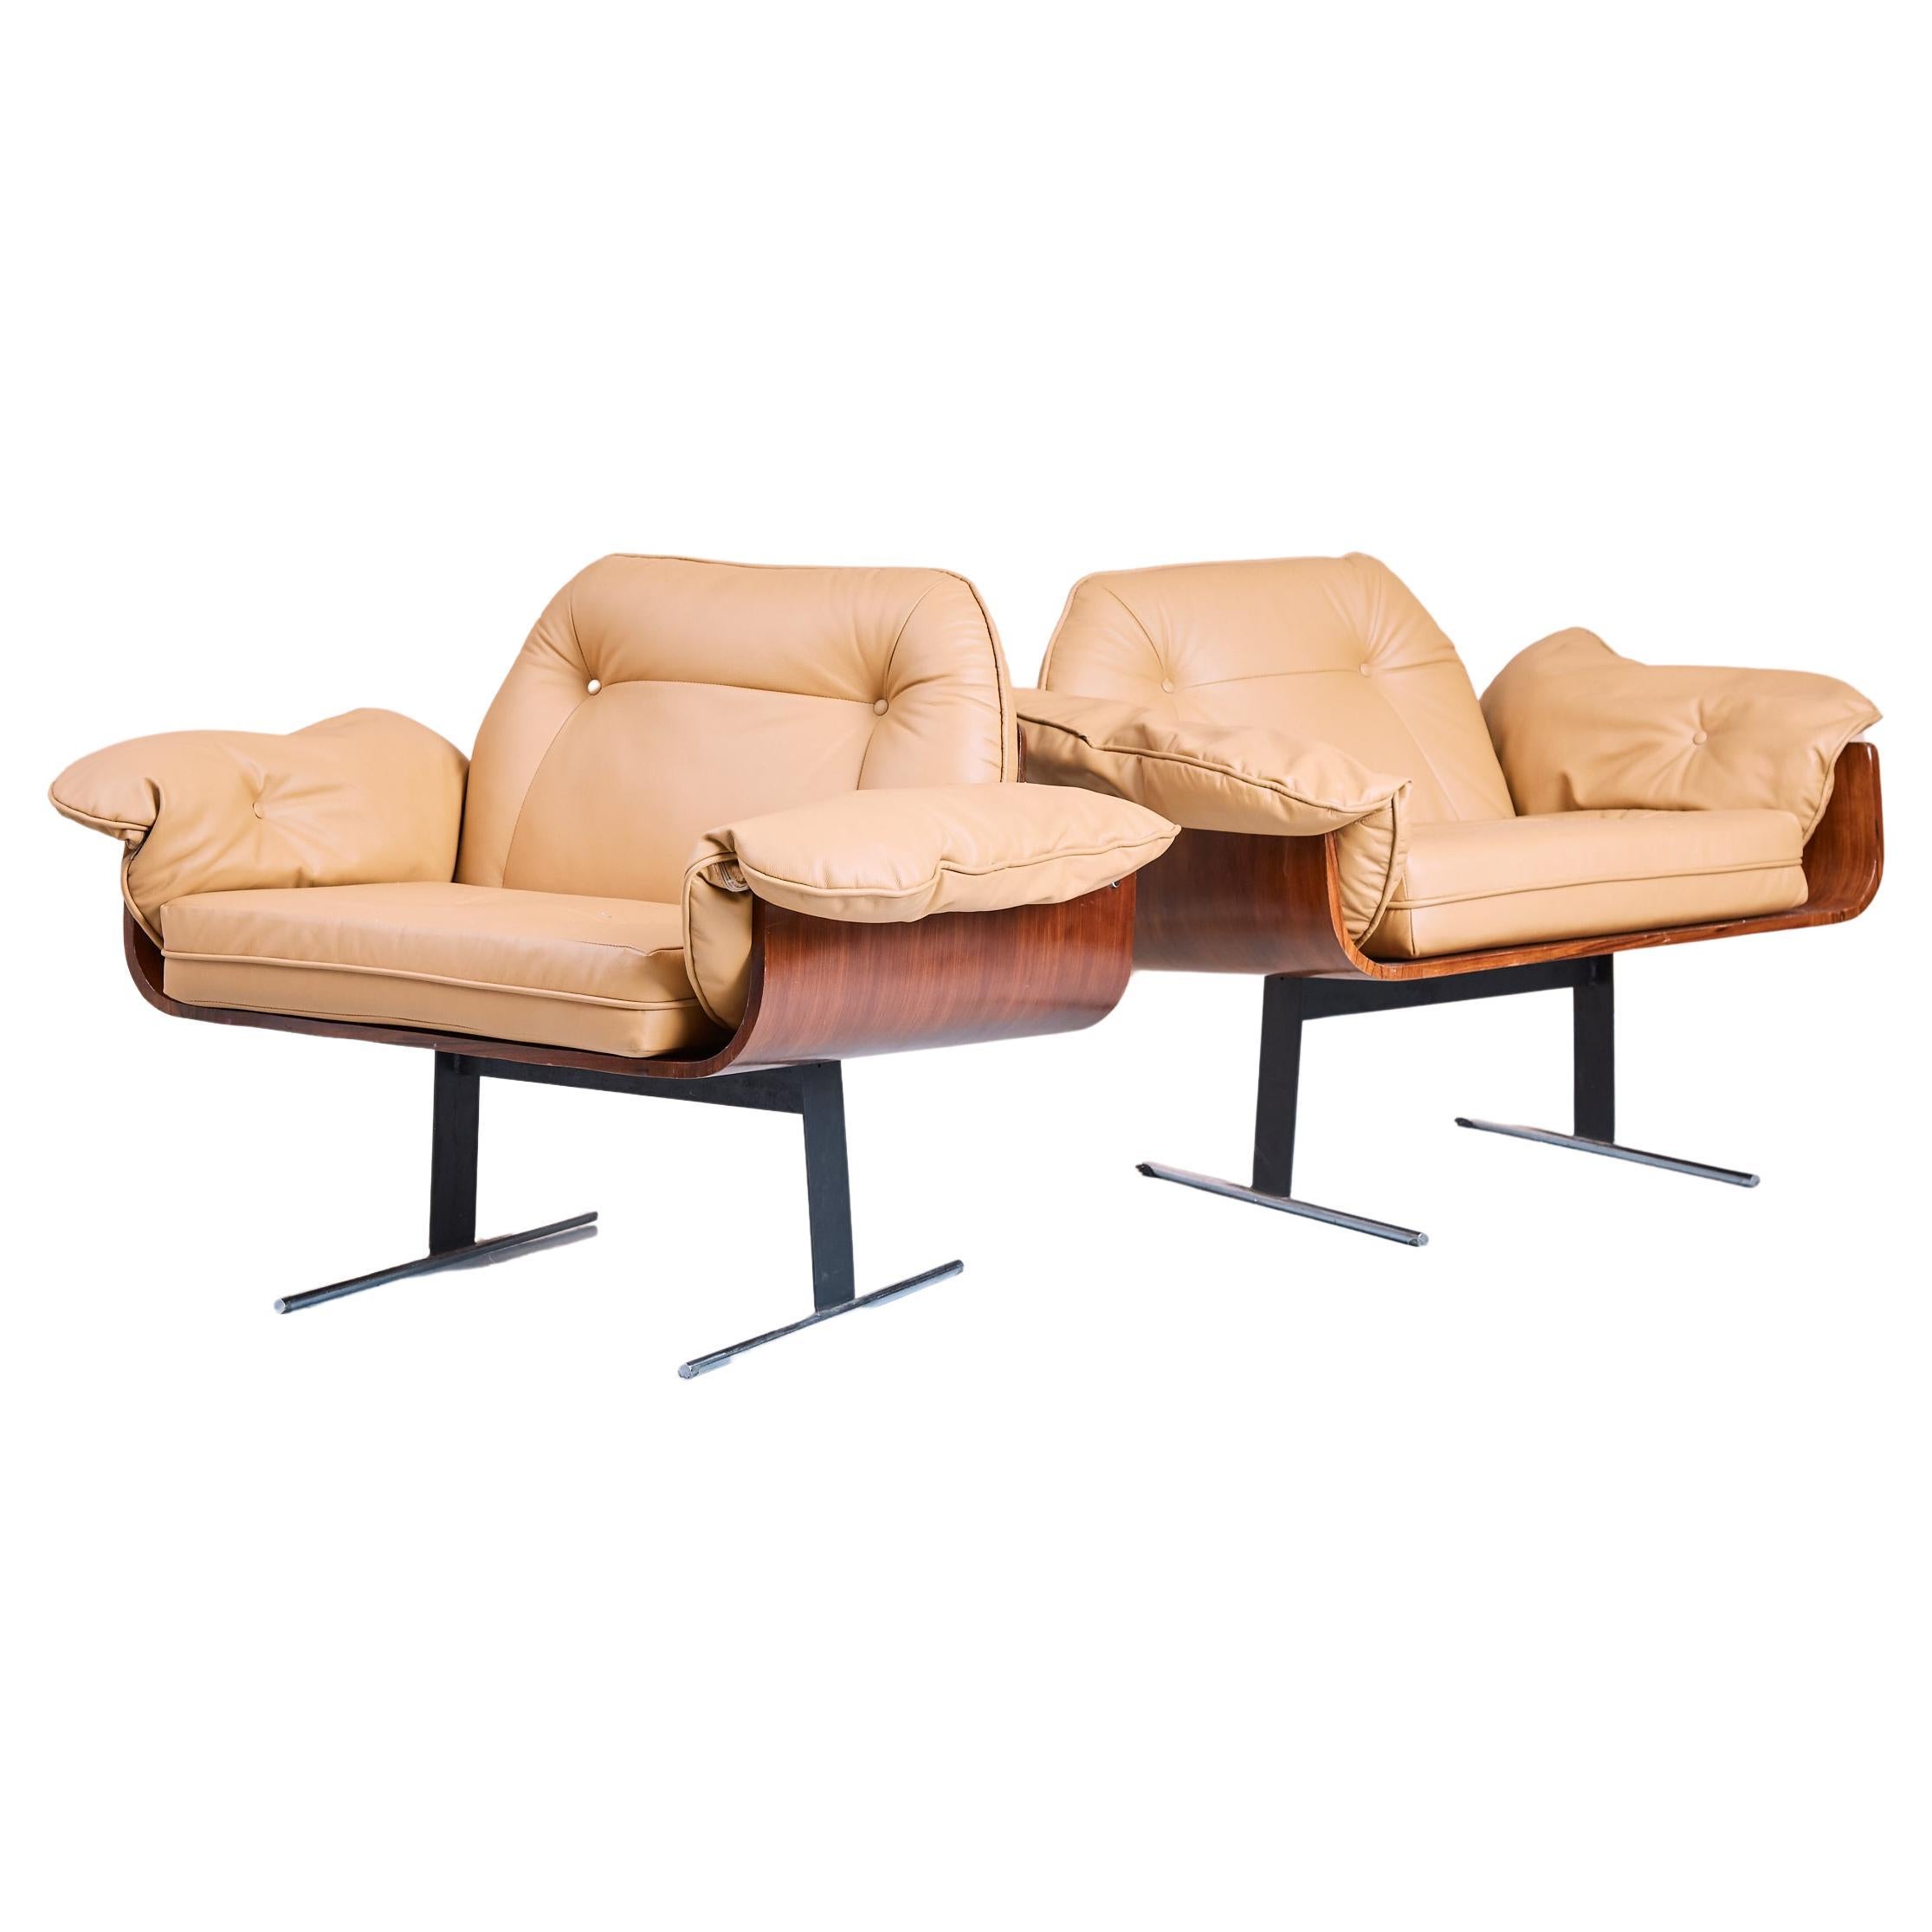 Pair of Brazilian 'Presidencial' Lounge Chairs by Jorge Zalszupin for L'Atelier